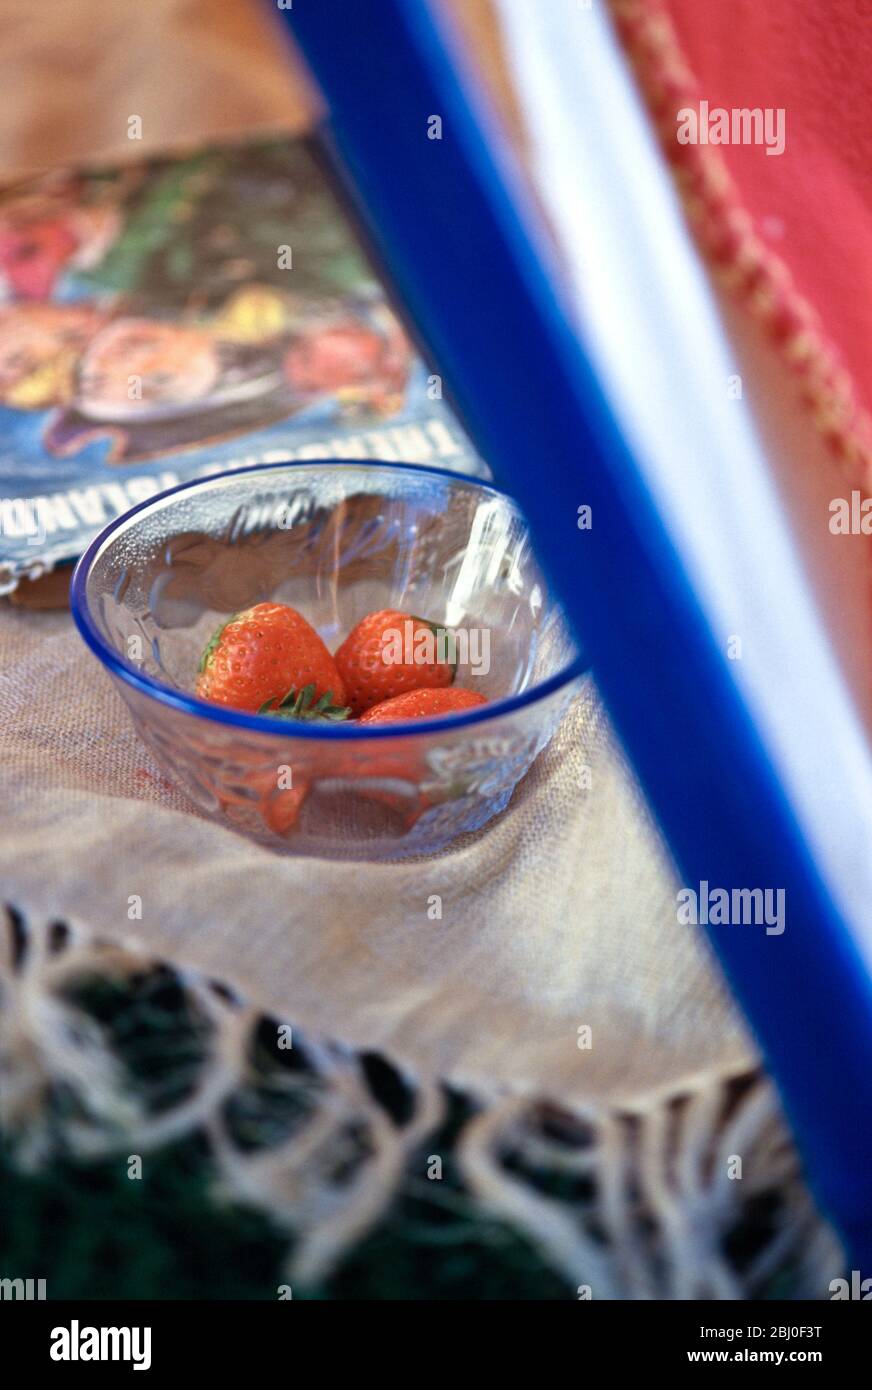 Detail of childen's summer garden playtent with story book and bowl of ripe strawberries - Stock Photo